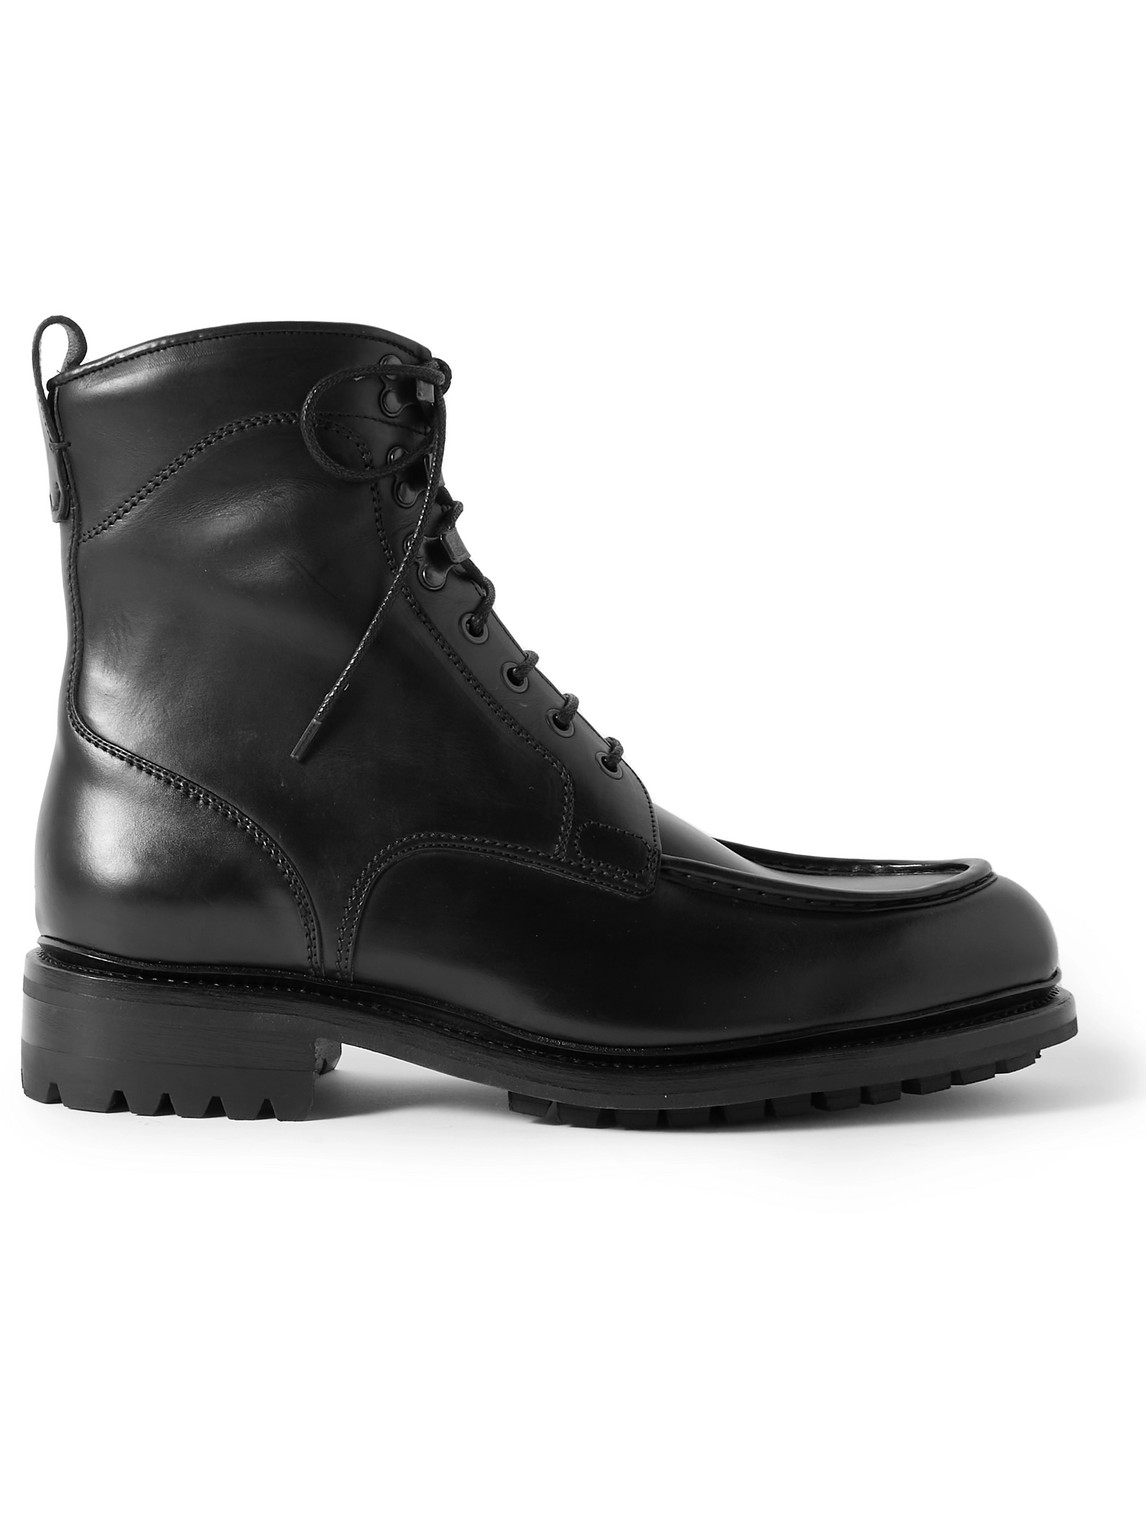 BRIONI LEATHER BOOTS